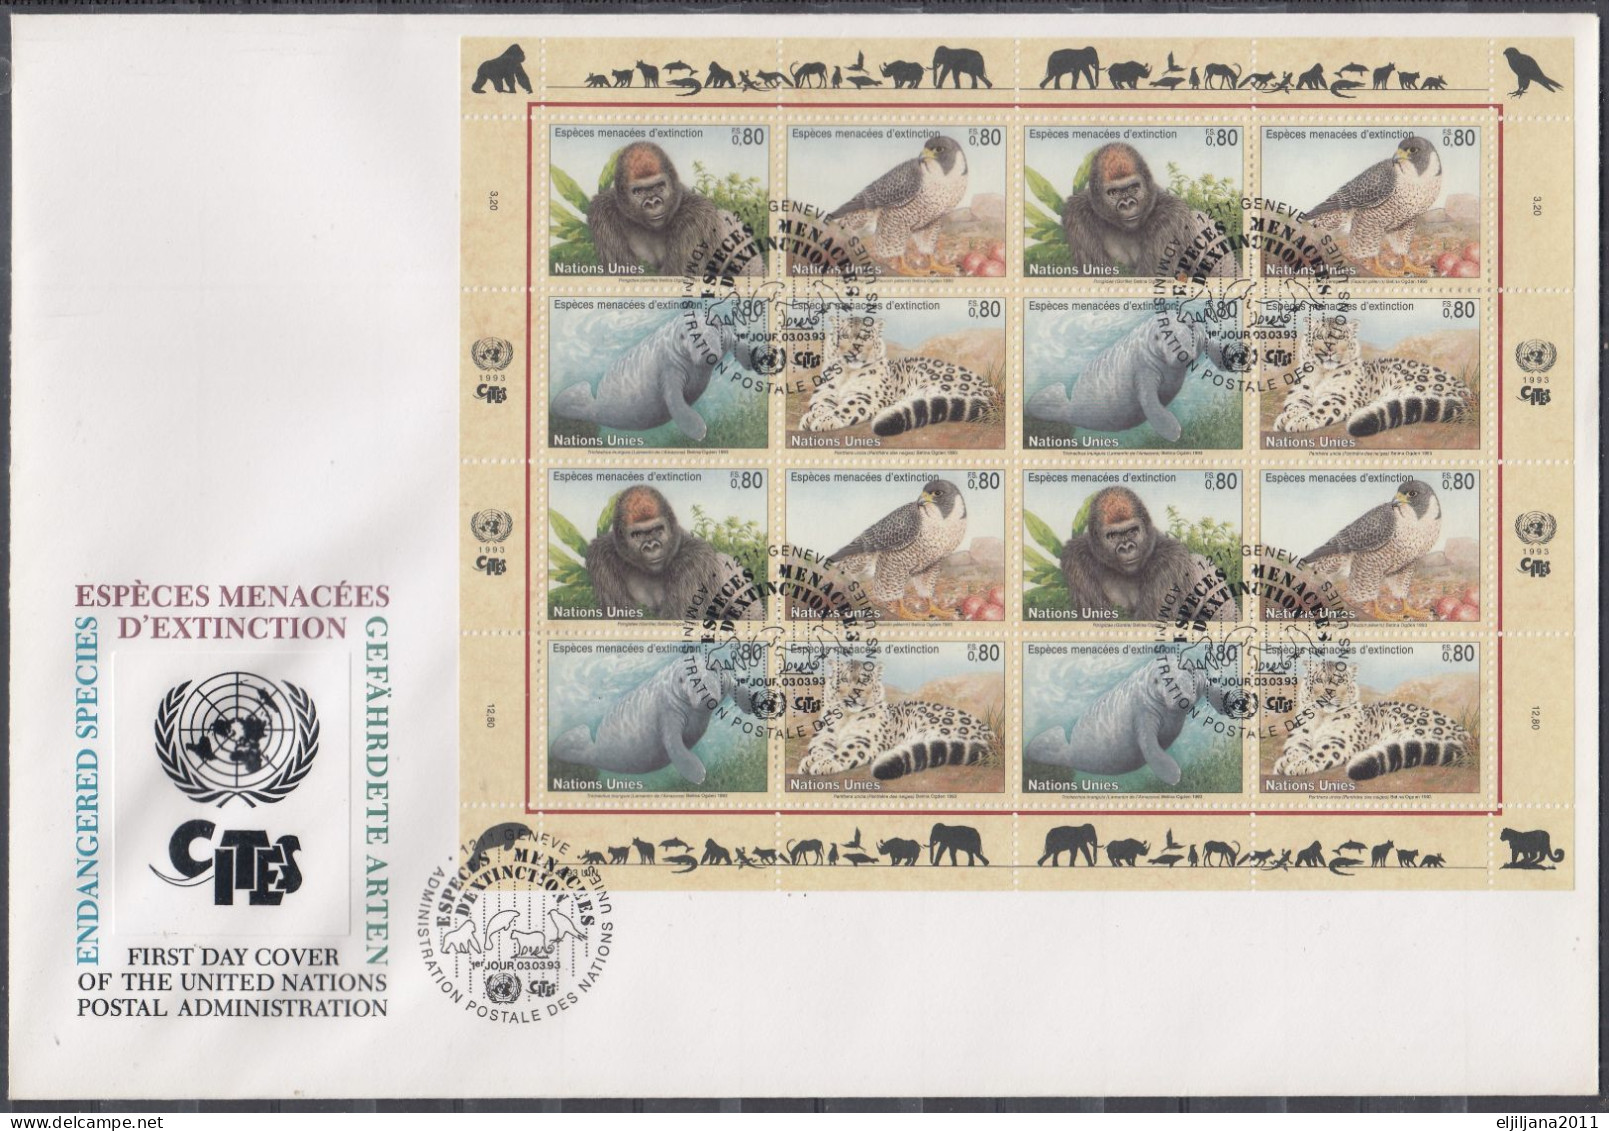 Action !! SALE !! 50 % OFF !! ⁕ UN 1993 Genf SWITZERLAND ⁕ Fauna - Endangered Species ⁕ XXL FDC Cover - Covers & Documents